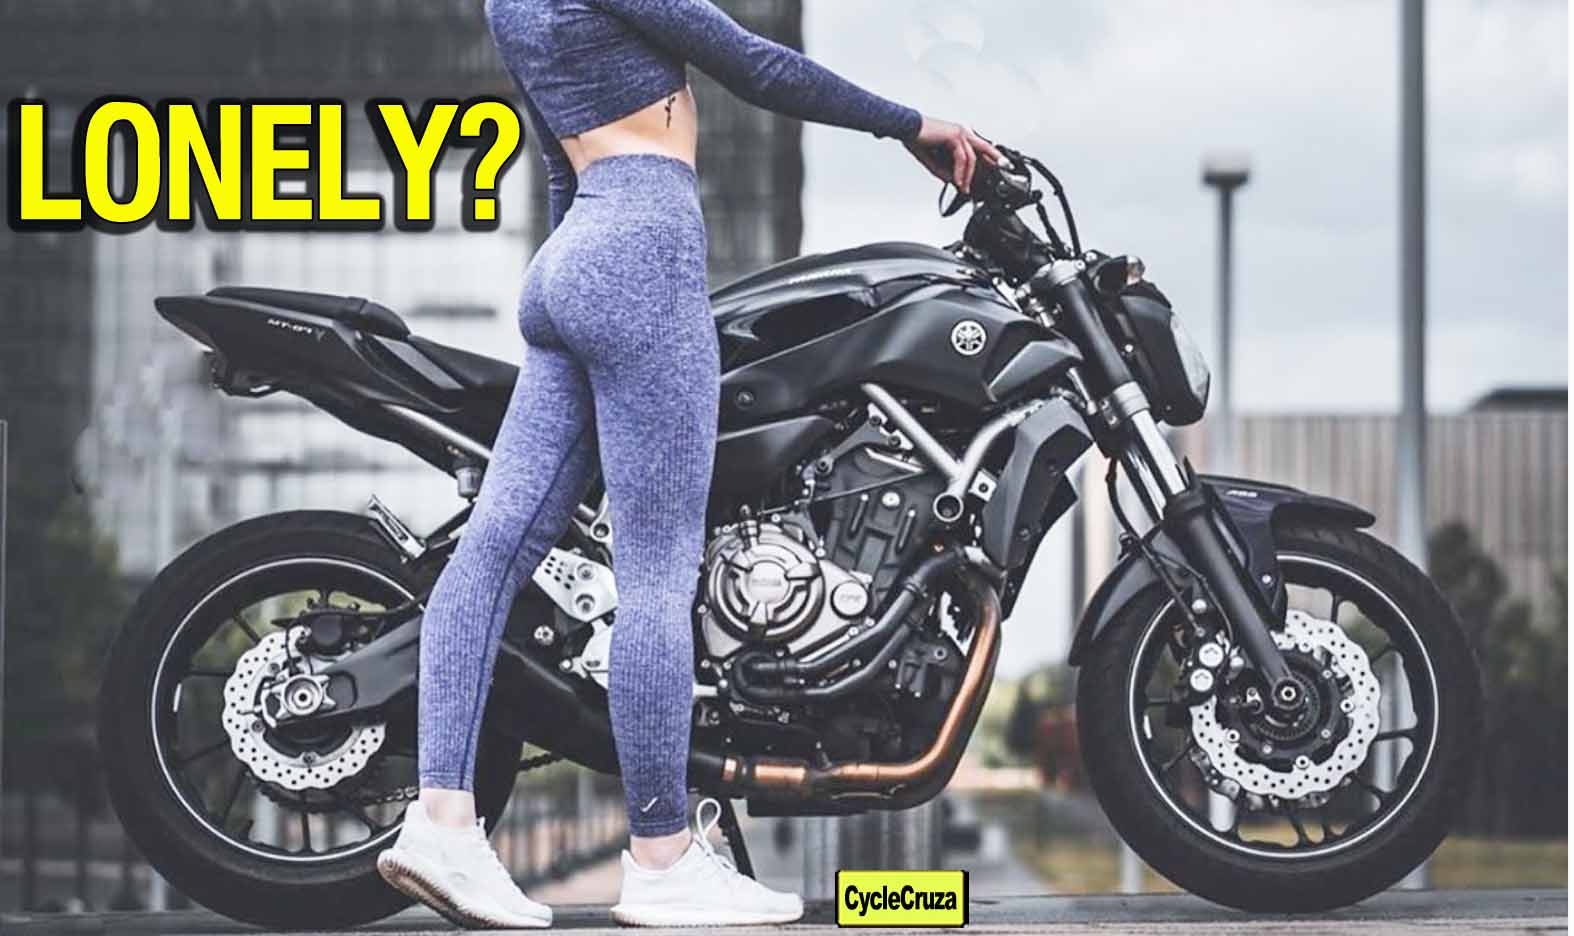 UGLY Truth About the Yamaha MT-07 